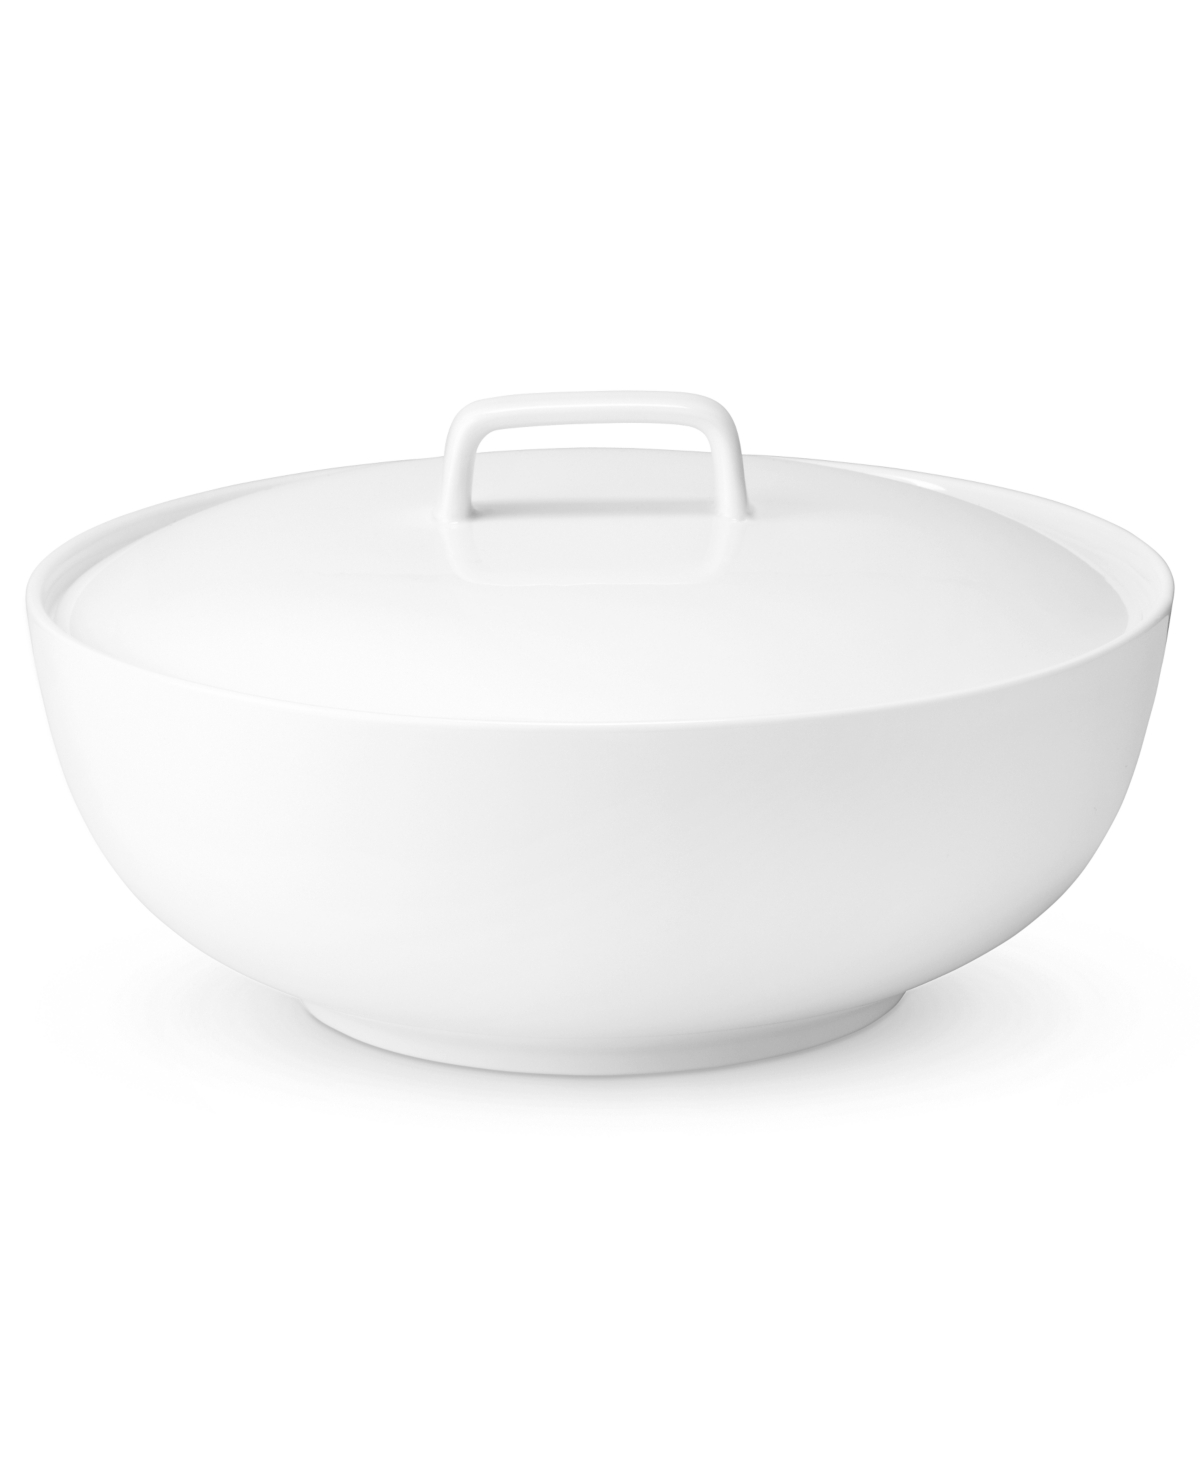 Whiteware Covered Vegetable Bowl 68 oz, Created for Macy's